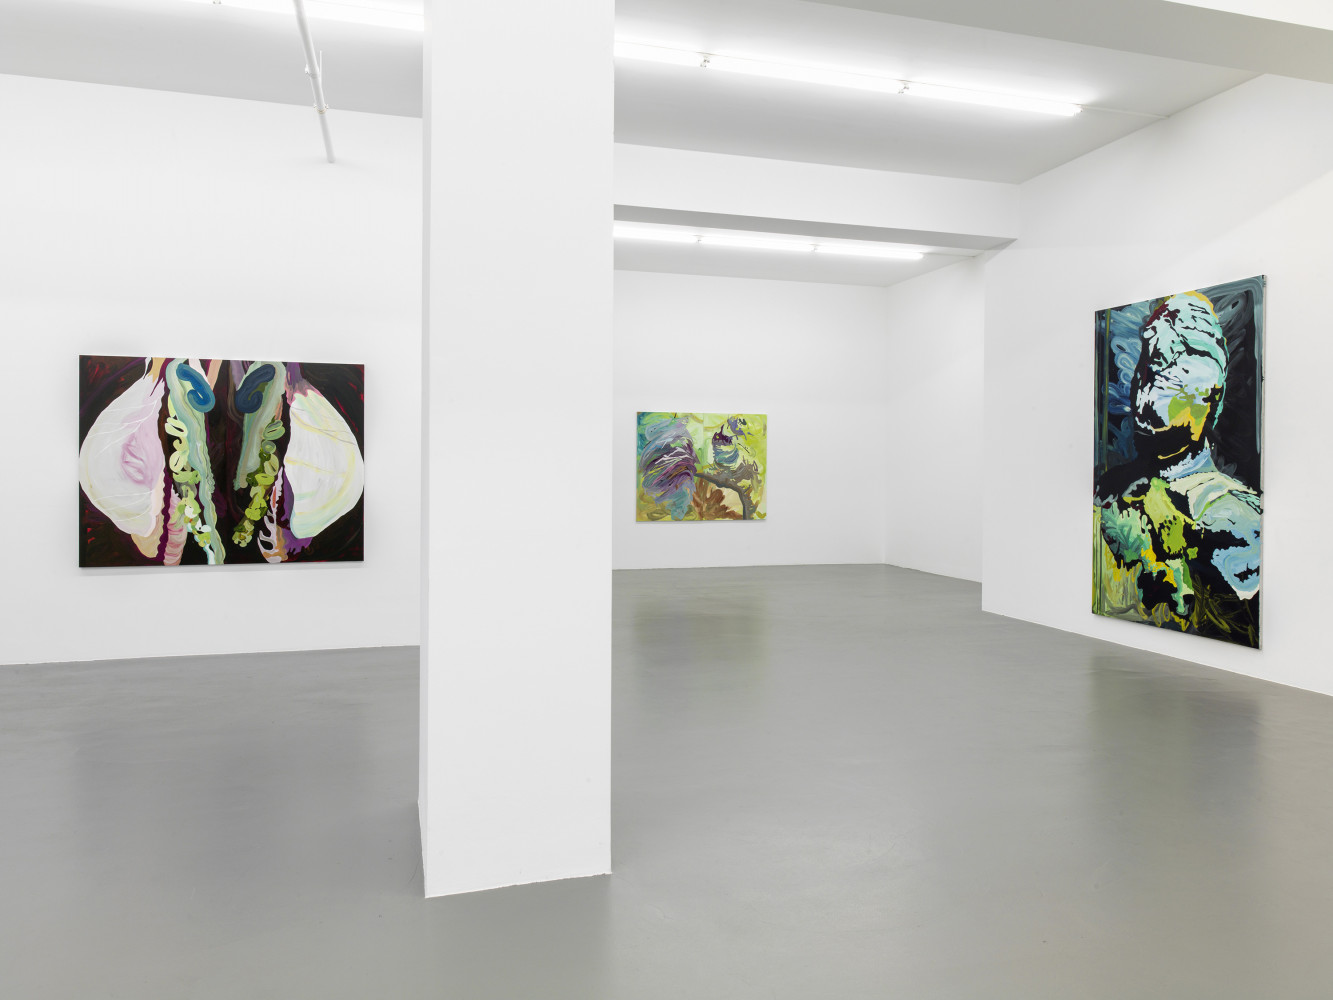 Clare Woods, Installation view, 2014